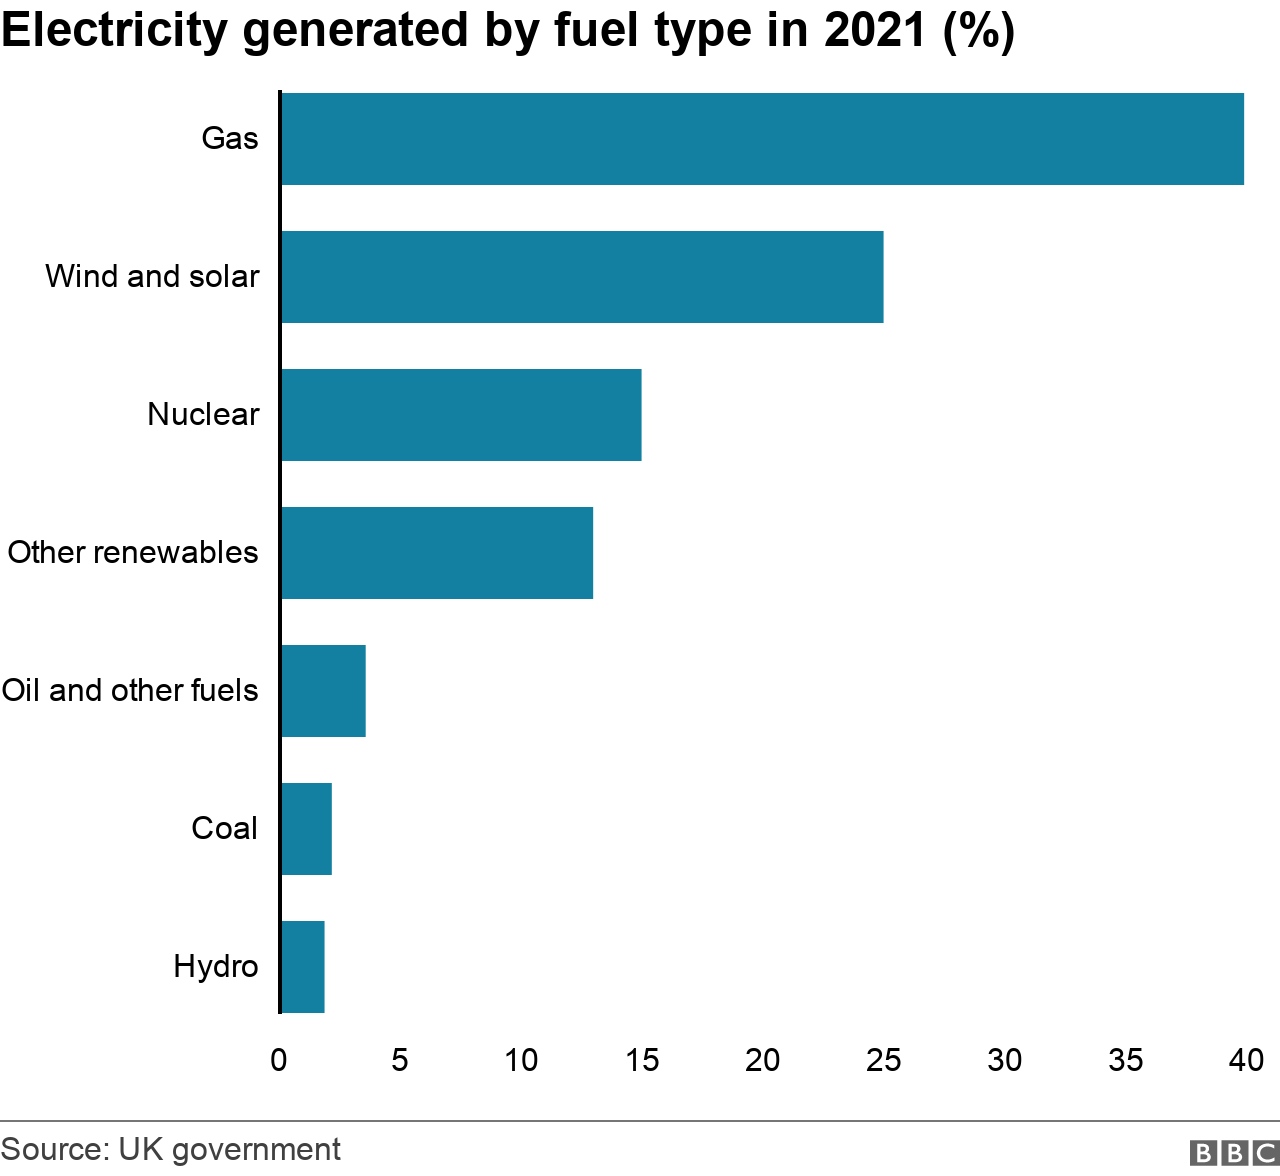 Electricity generated by fuel type in 2021